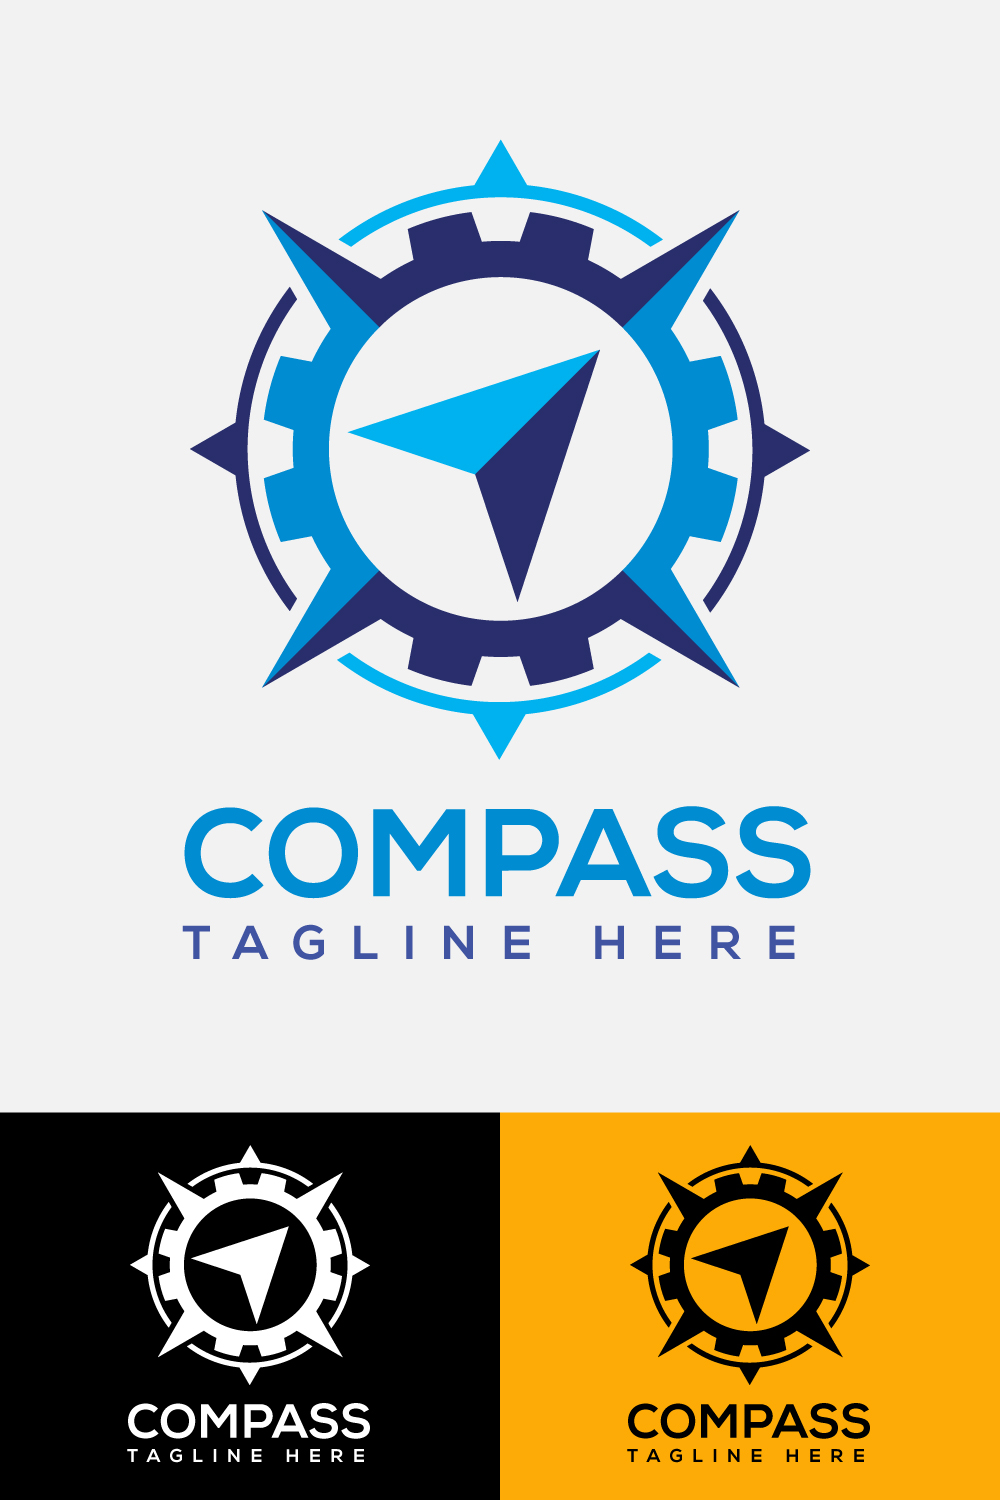 Pack of images of beautiful round logos in the form of a compass.